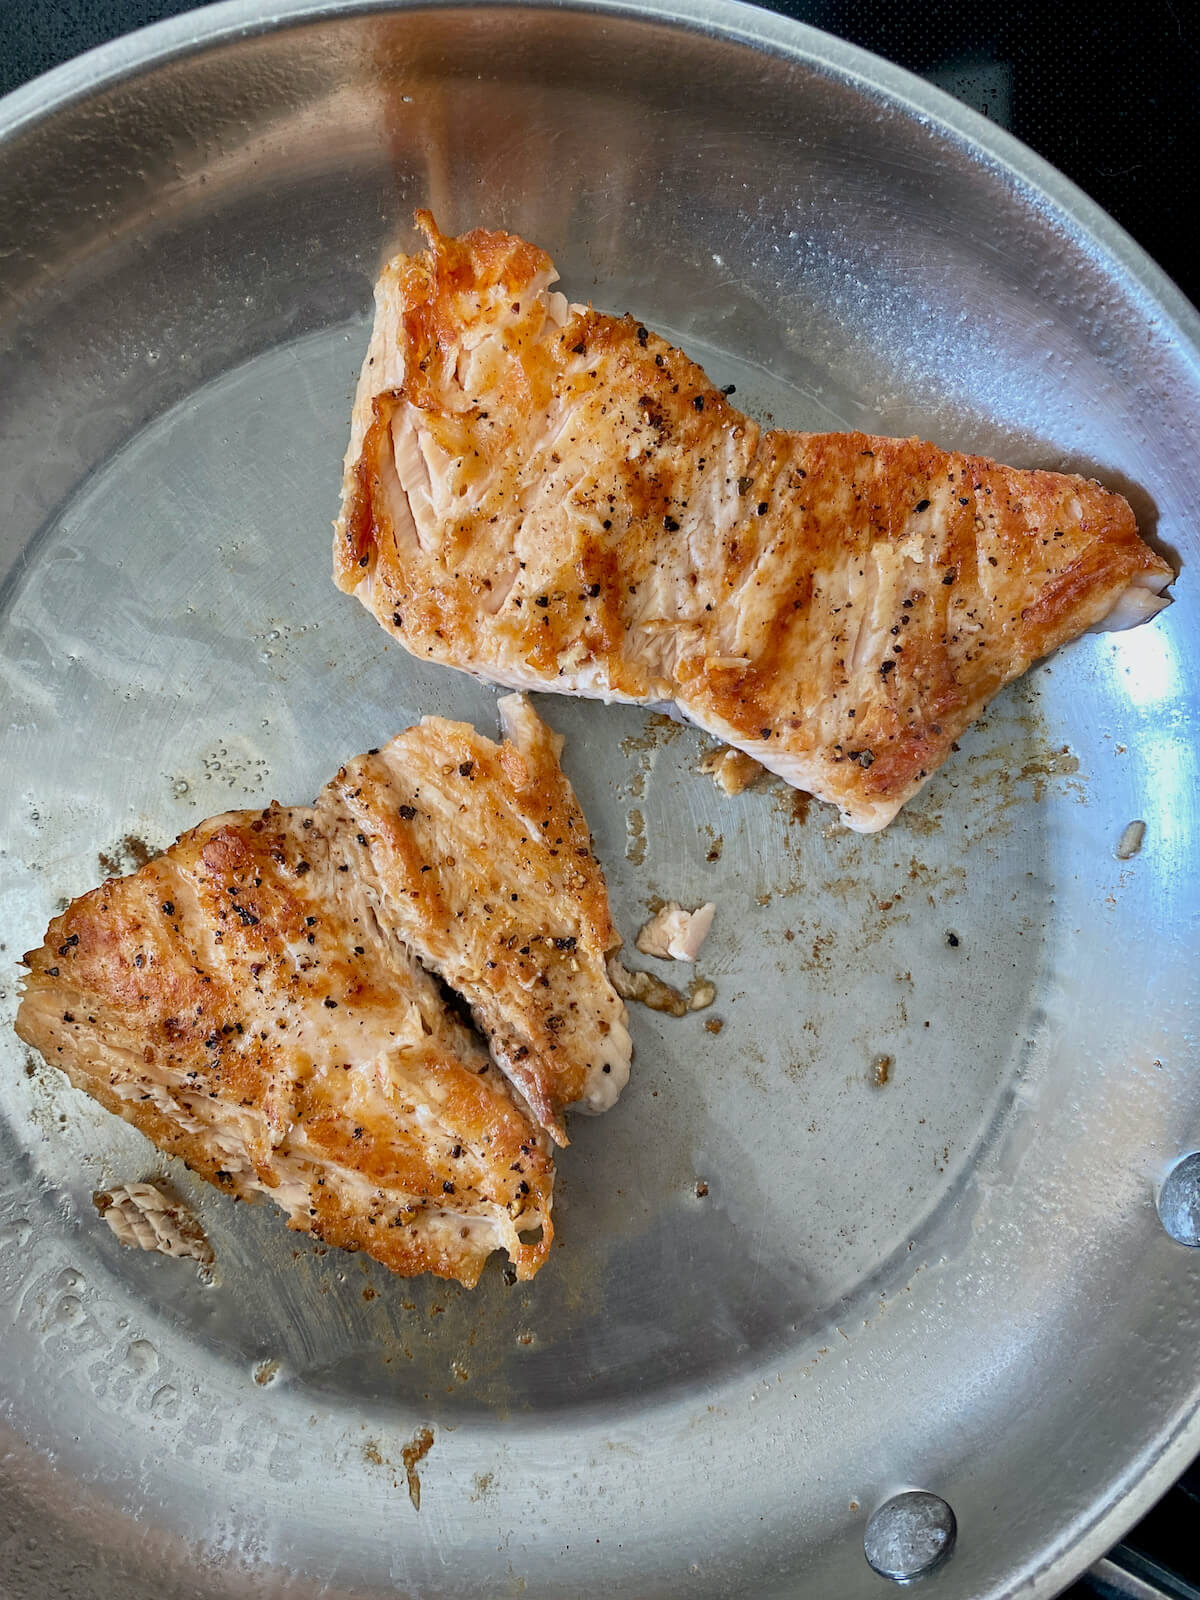 Seared salmon in a stainless steel skillet.